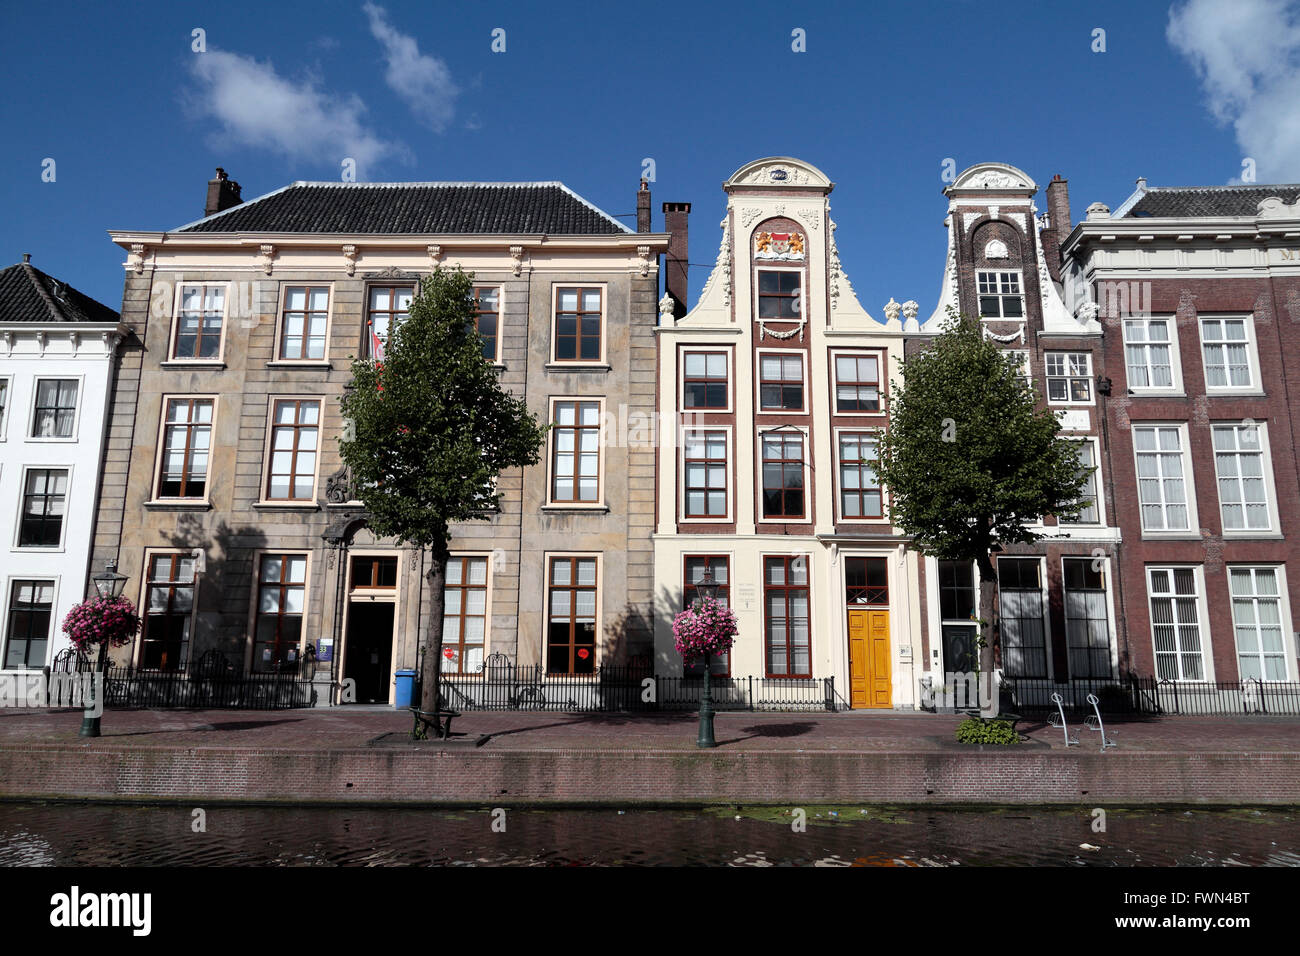 Beautiful canal side houses in Leiden, South Holland, Netherlands. Stock Photo